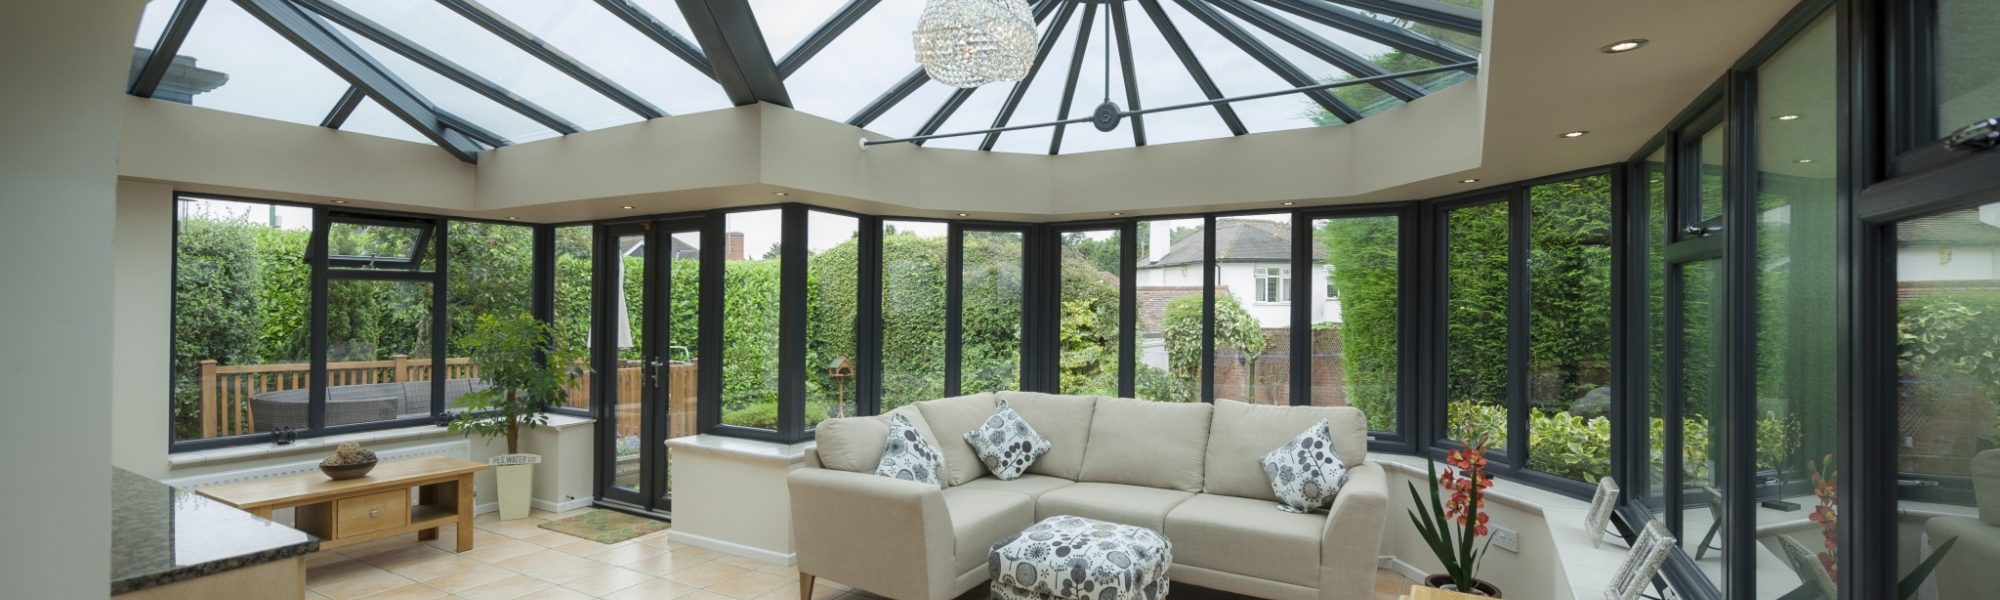 Interior of an orangery conservatory extension, featuring kitchen counter top and modern, stylish furniture.